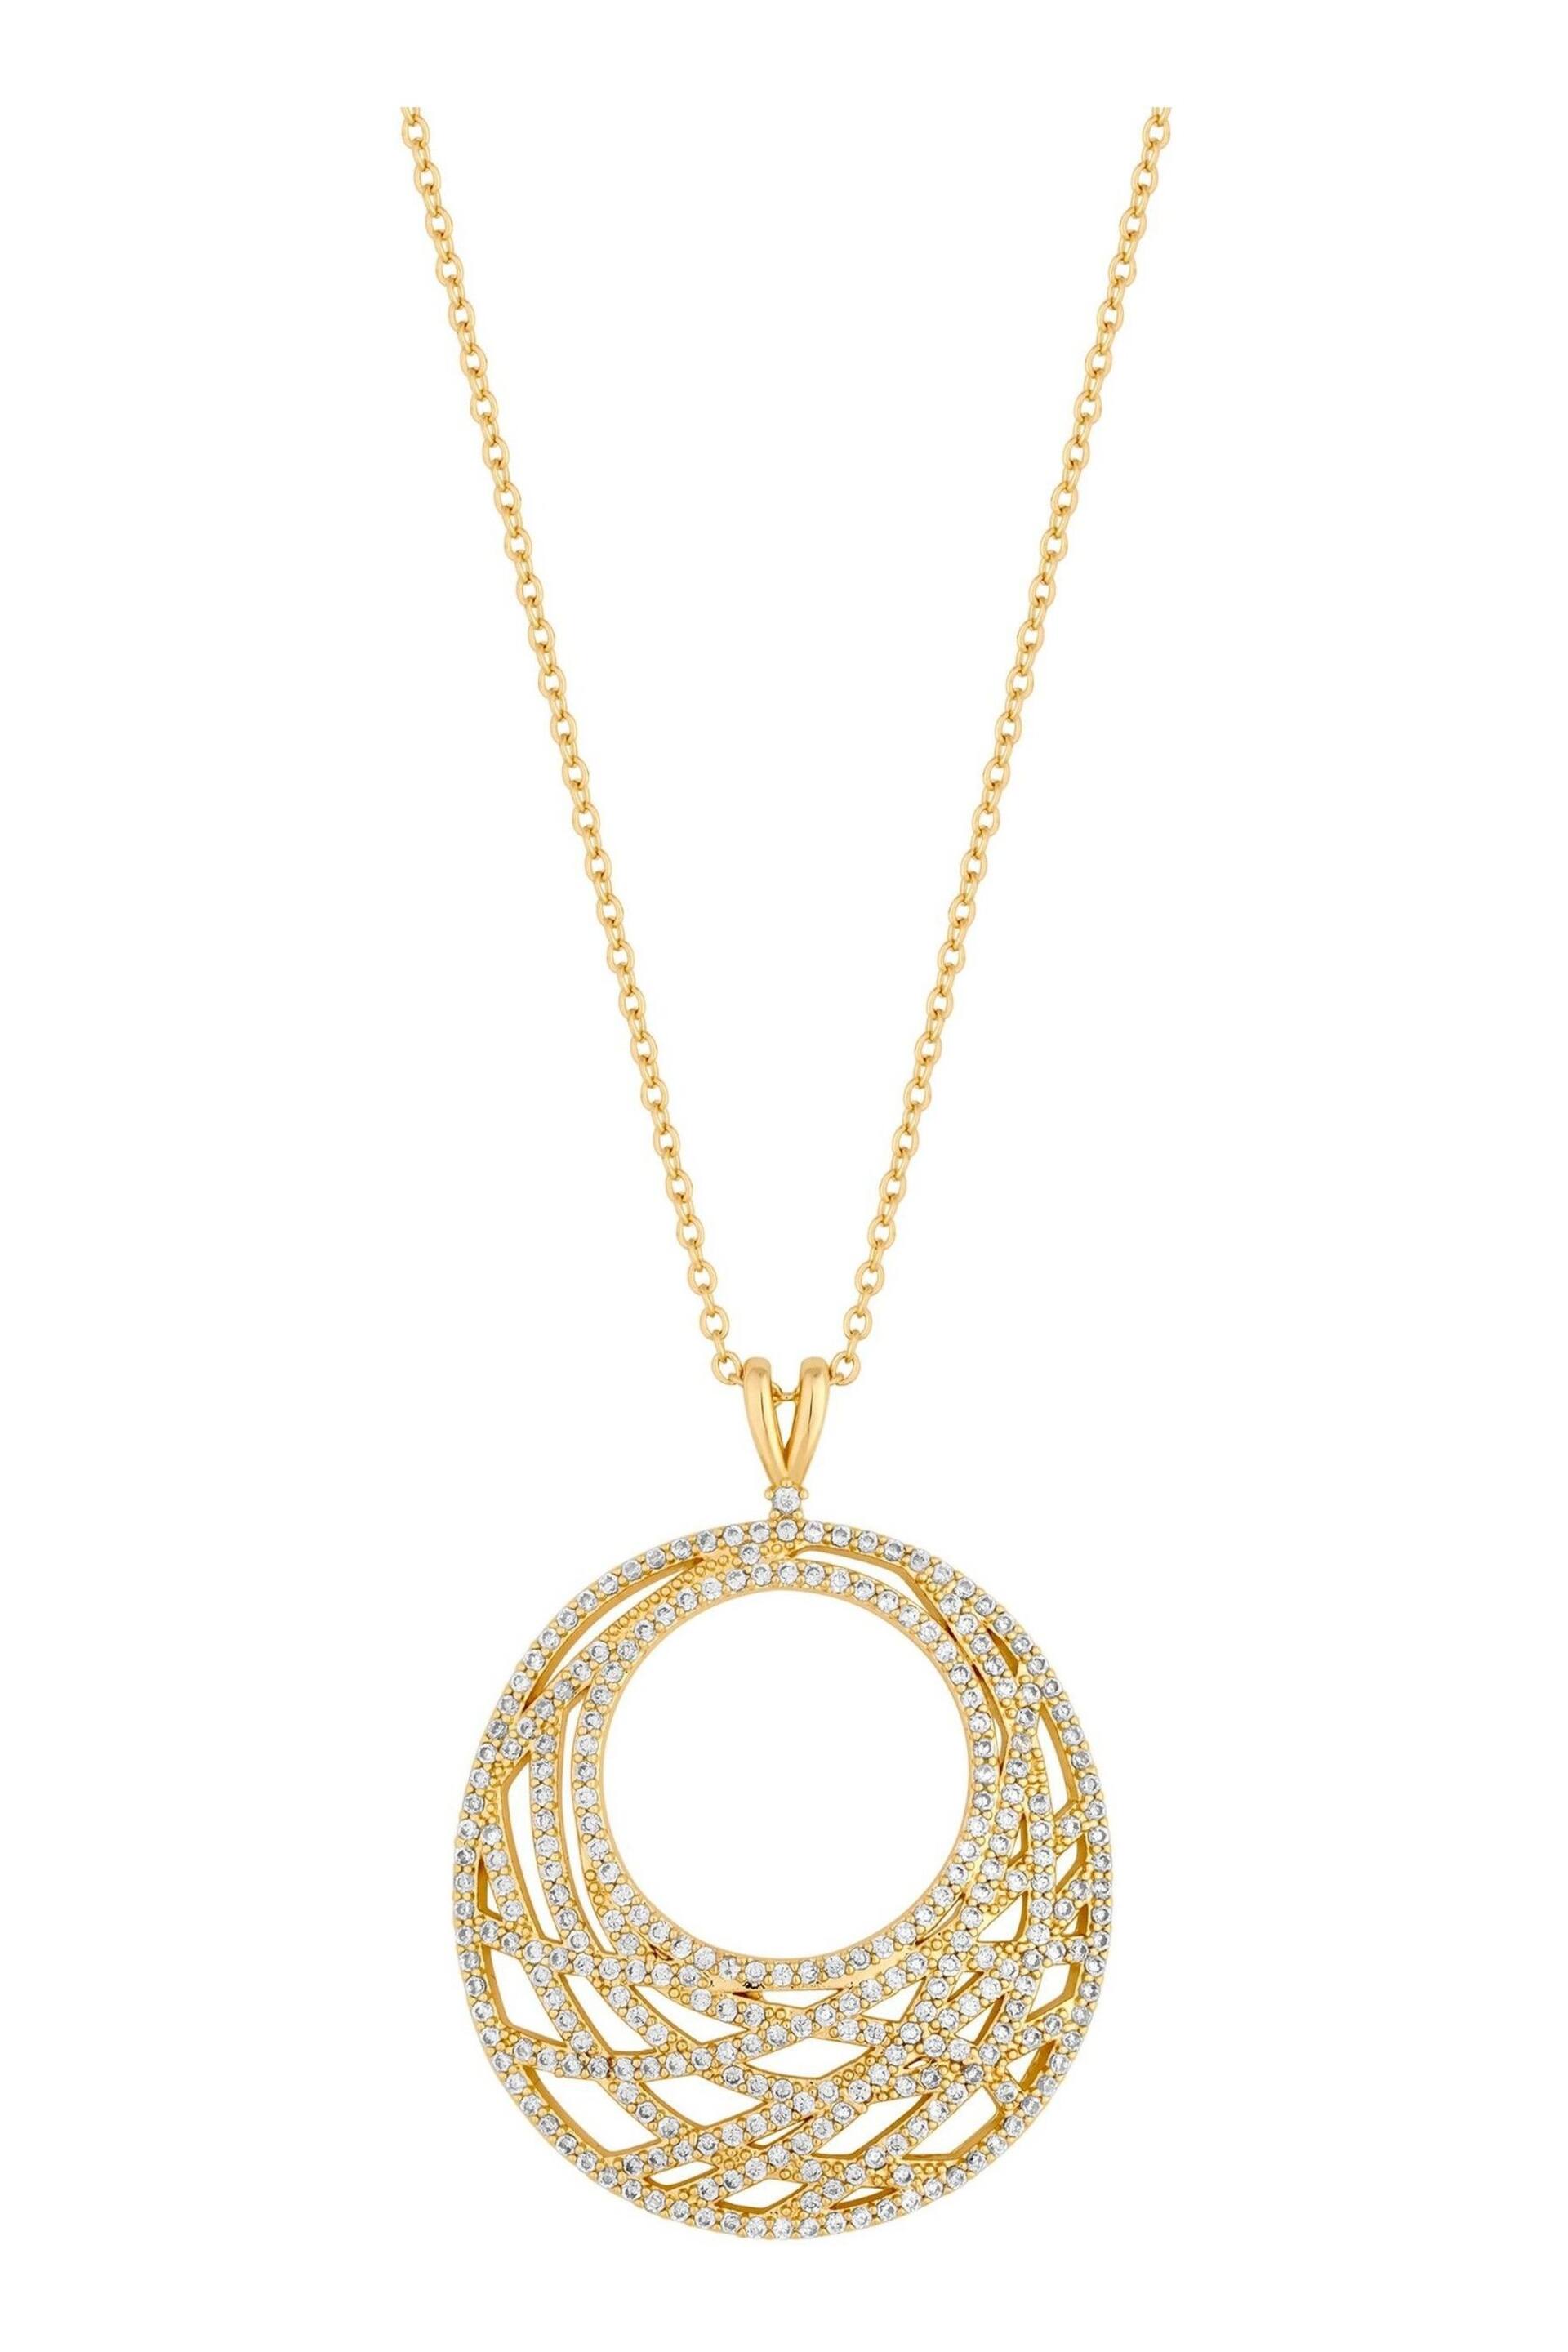 Inicio Gold Plated Cubic Zirconia Contemporary Open Pendant Necklace - Image 1 of 2